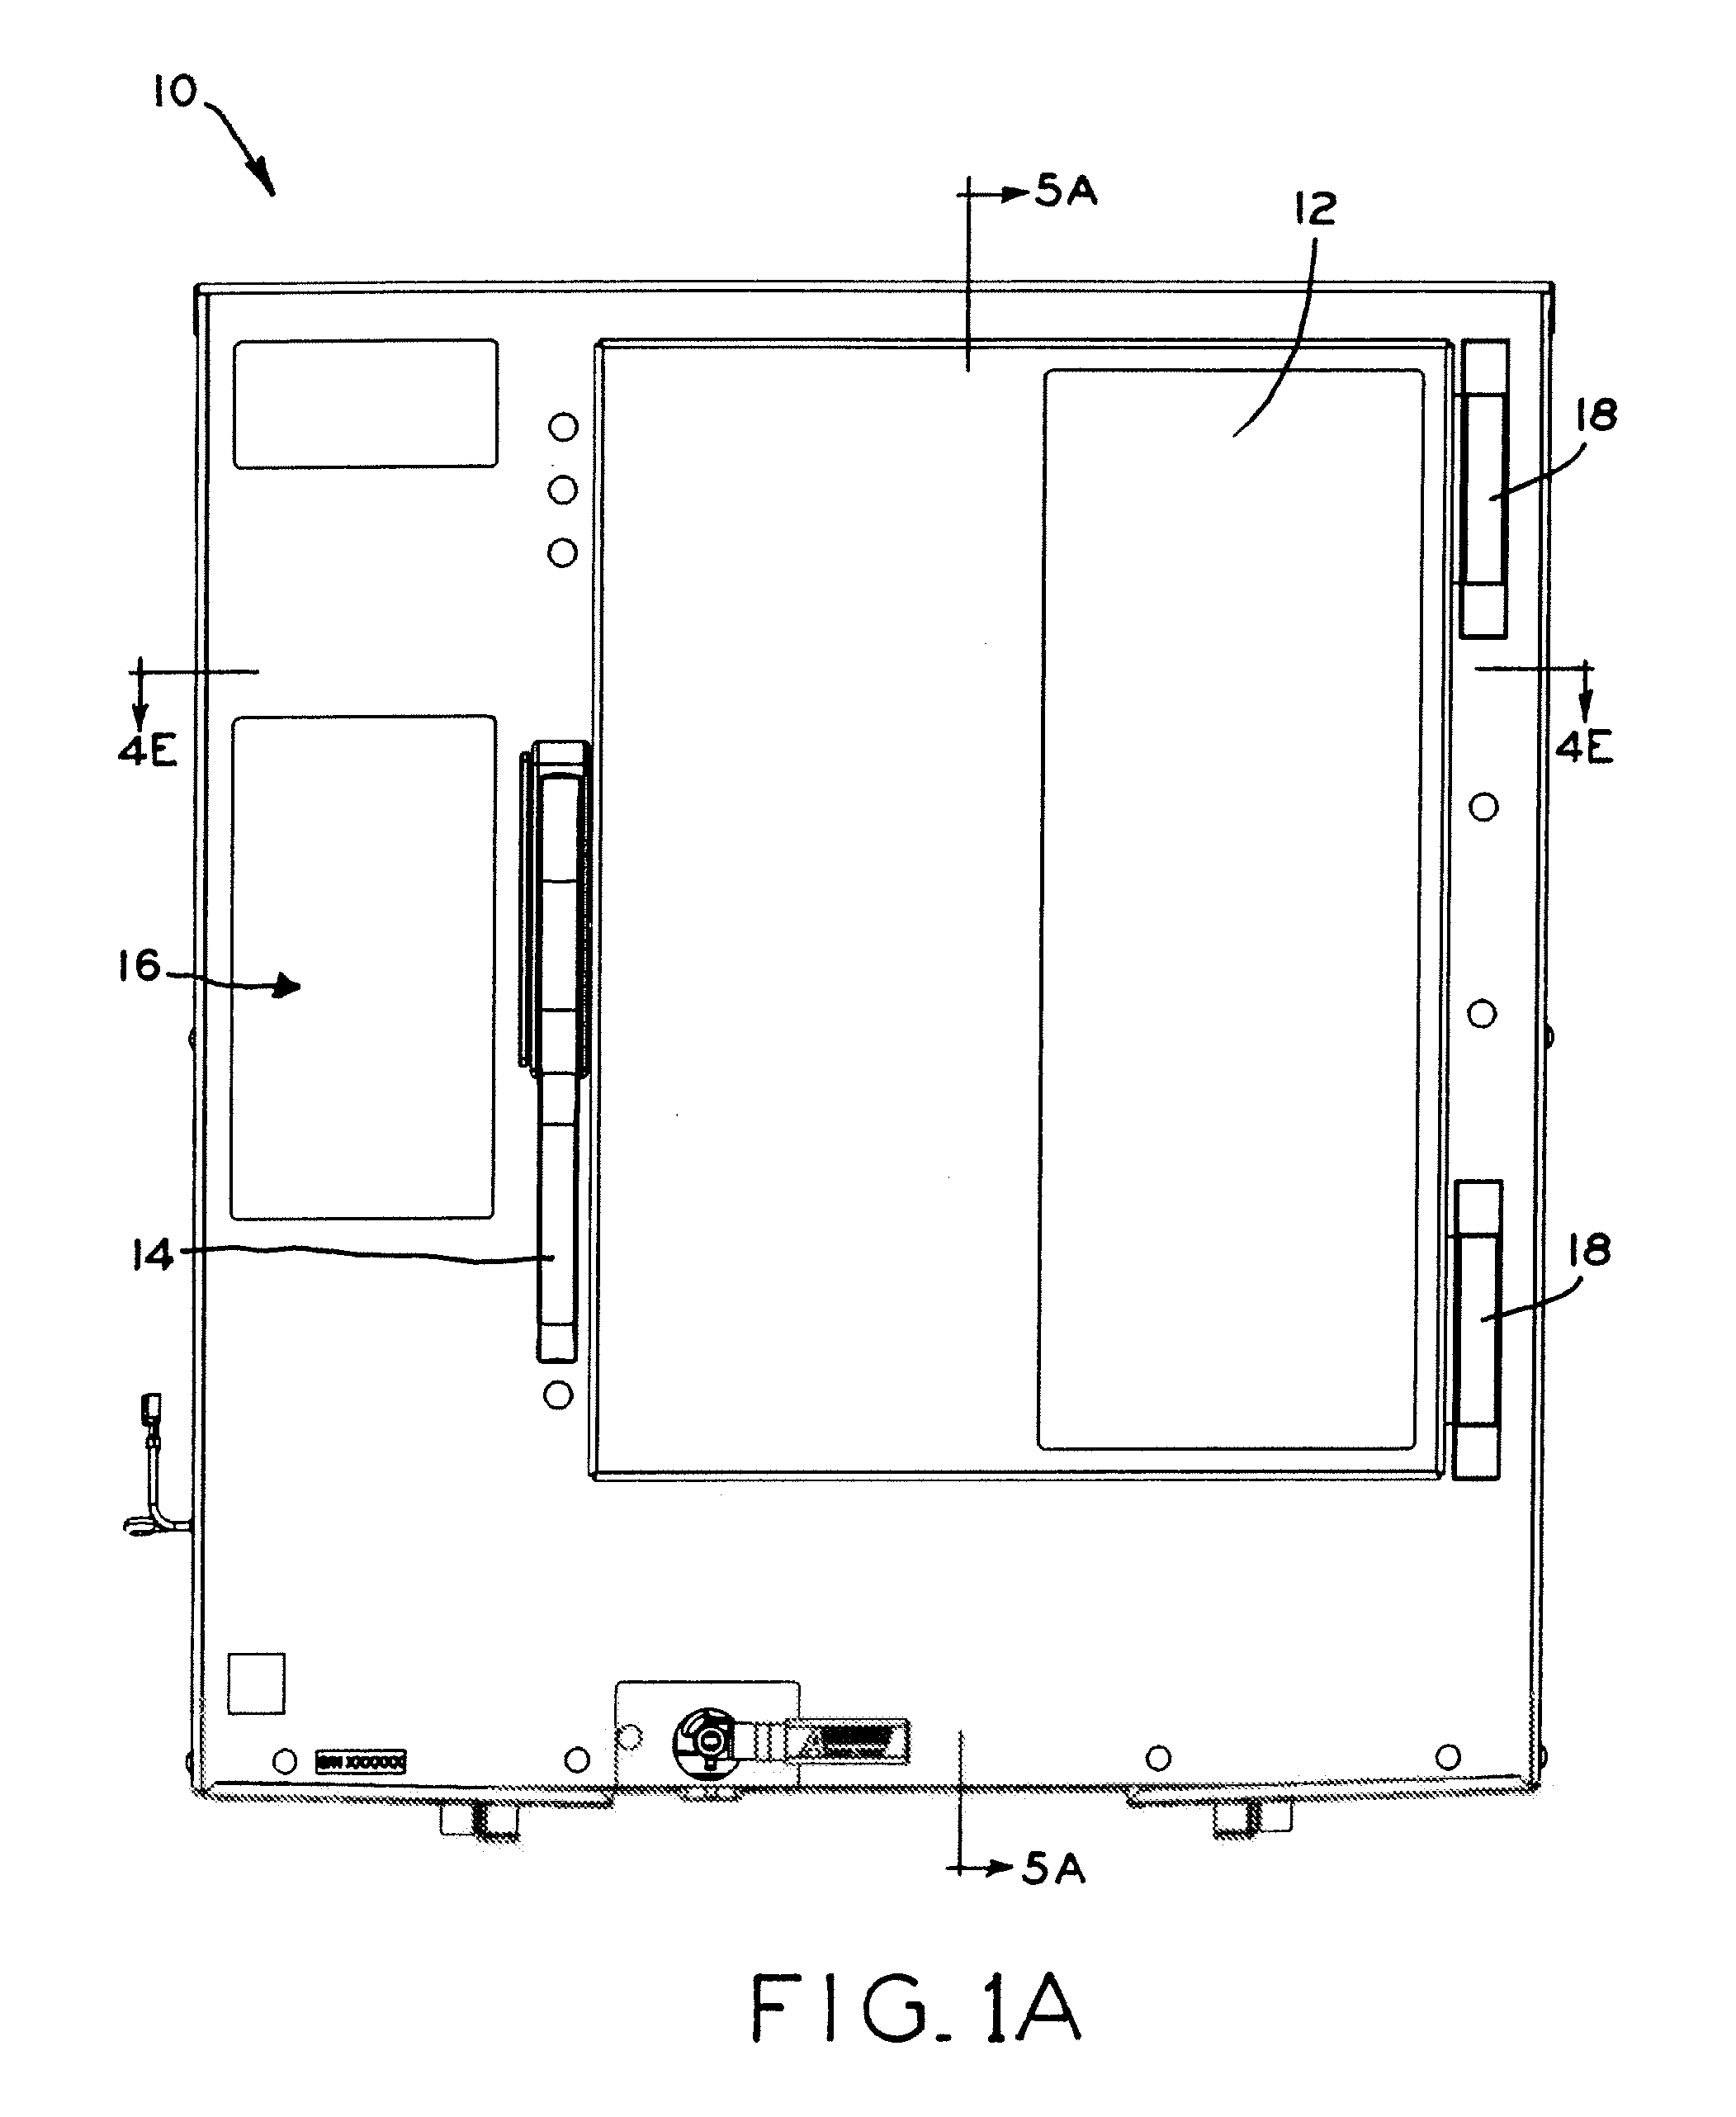 Method and apparatus for directing steam distribution in a steam cooker